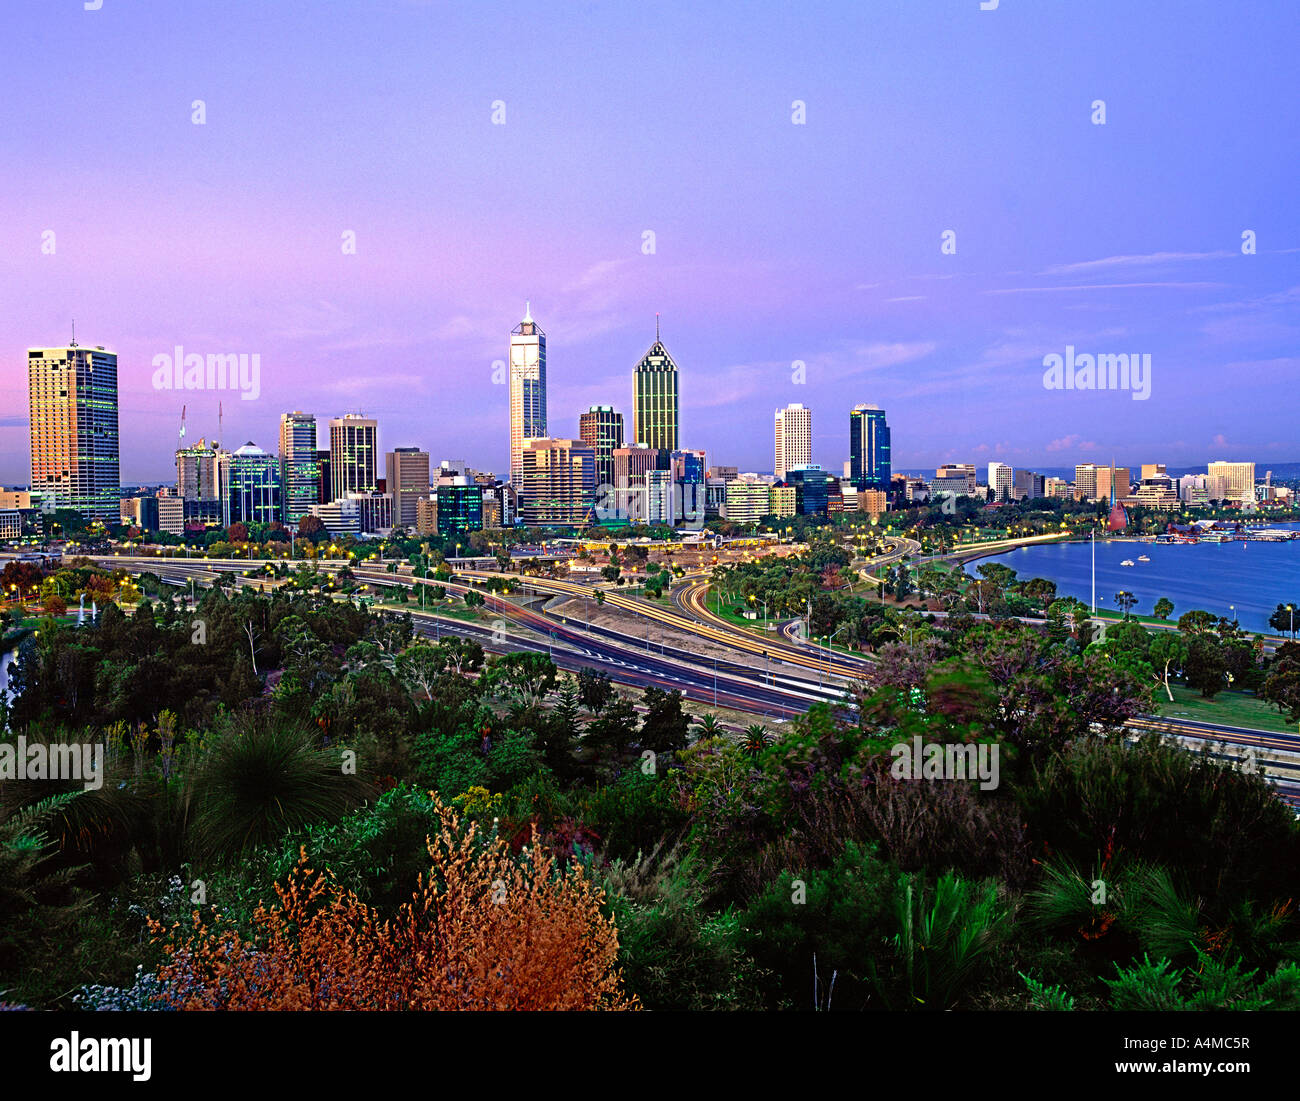 The Perth skyline at dusk. Perth is the capital of Western Australia. Photographed on 6X7 transparency film. Stock Photo